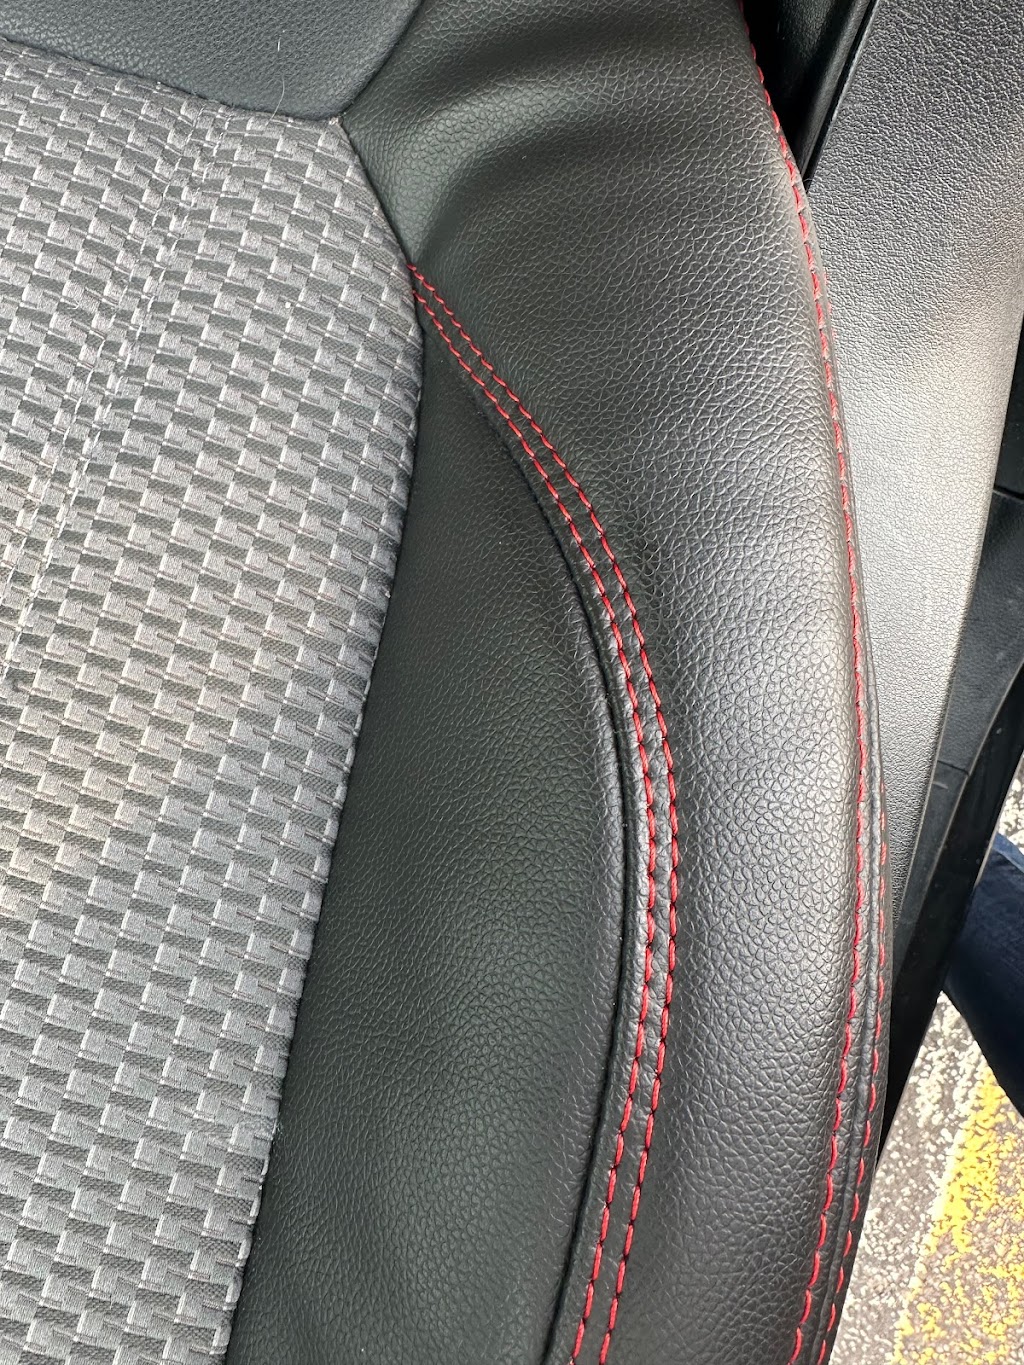 D&R Auto & Boat Upholstery Convertible Tops | 937 Tabor Rd, Morris Plains, NJ 07950 | Phone: (973) 267-7024